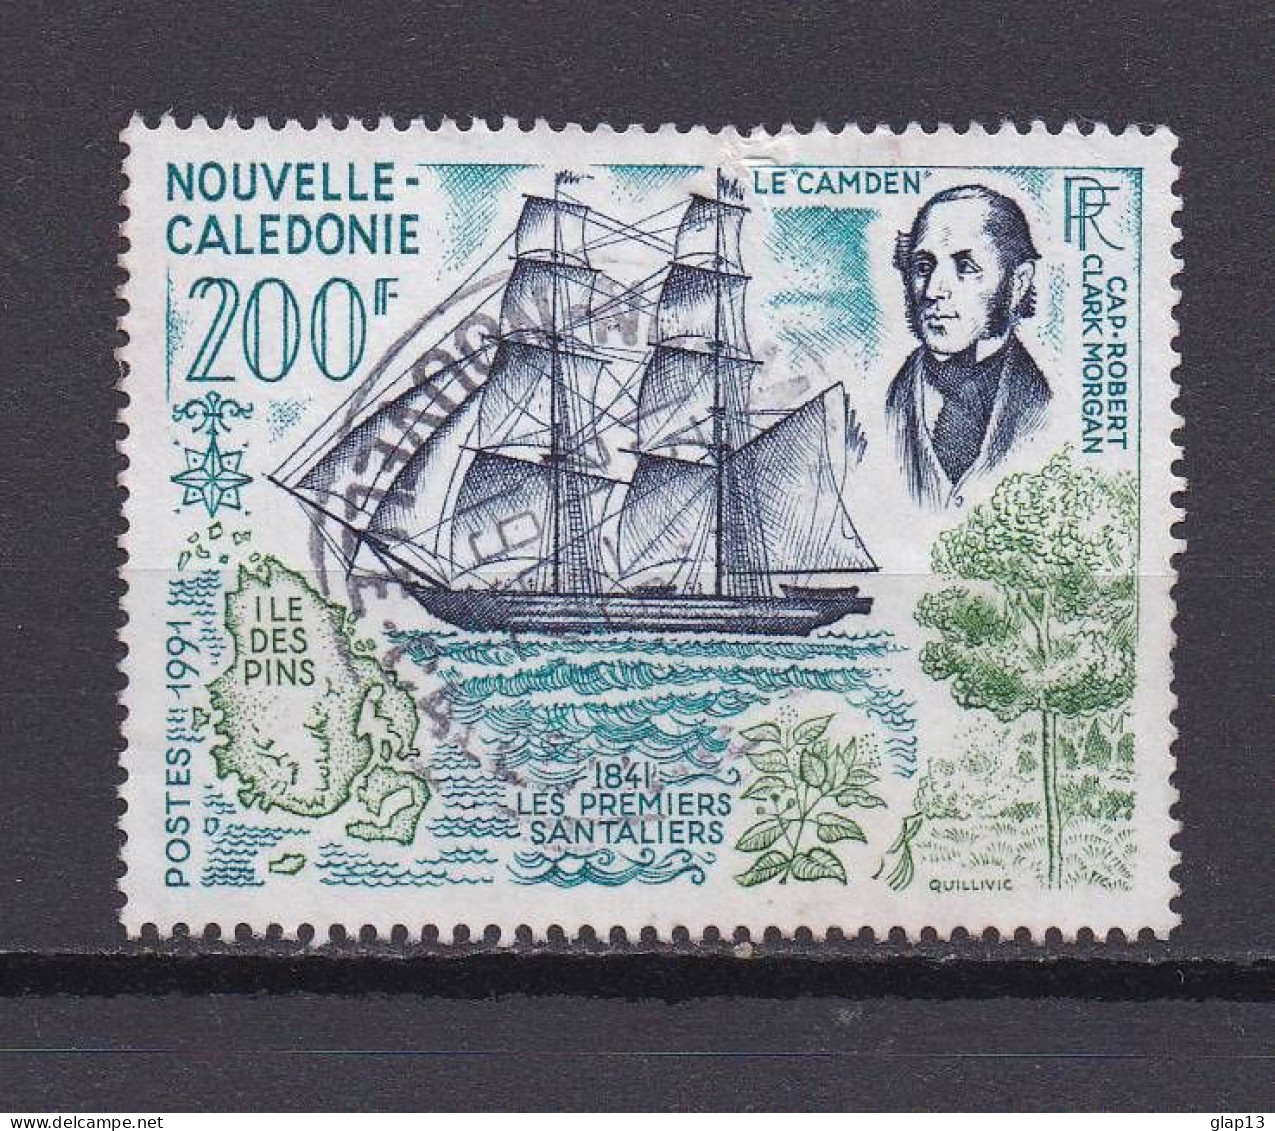 NOUVELLE-CALEDONIE 1991 TIMBRE N°622 OBLITERE BATEAU - Used Stamps